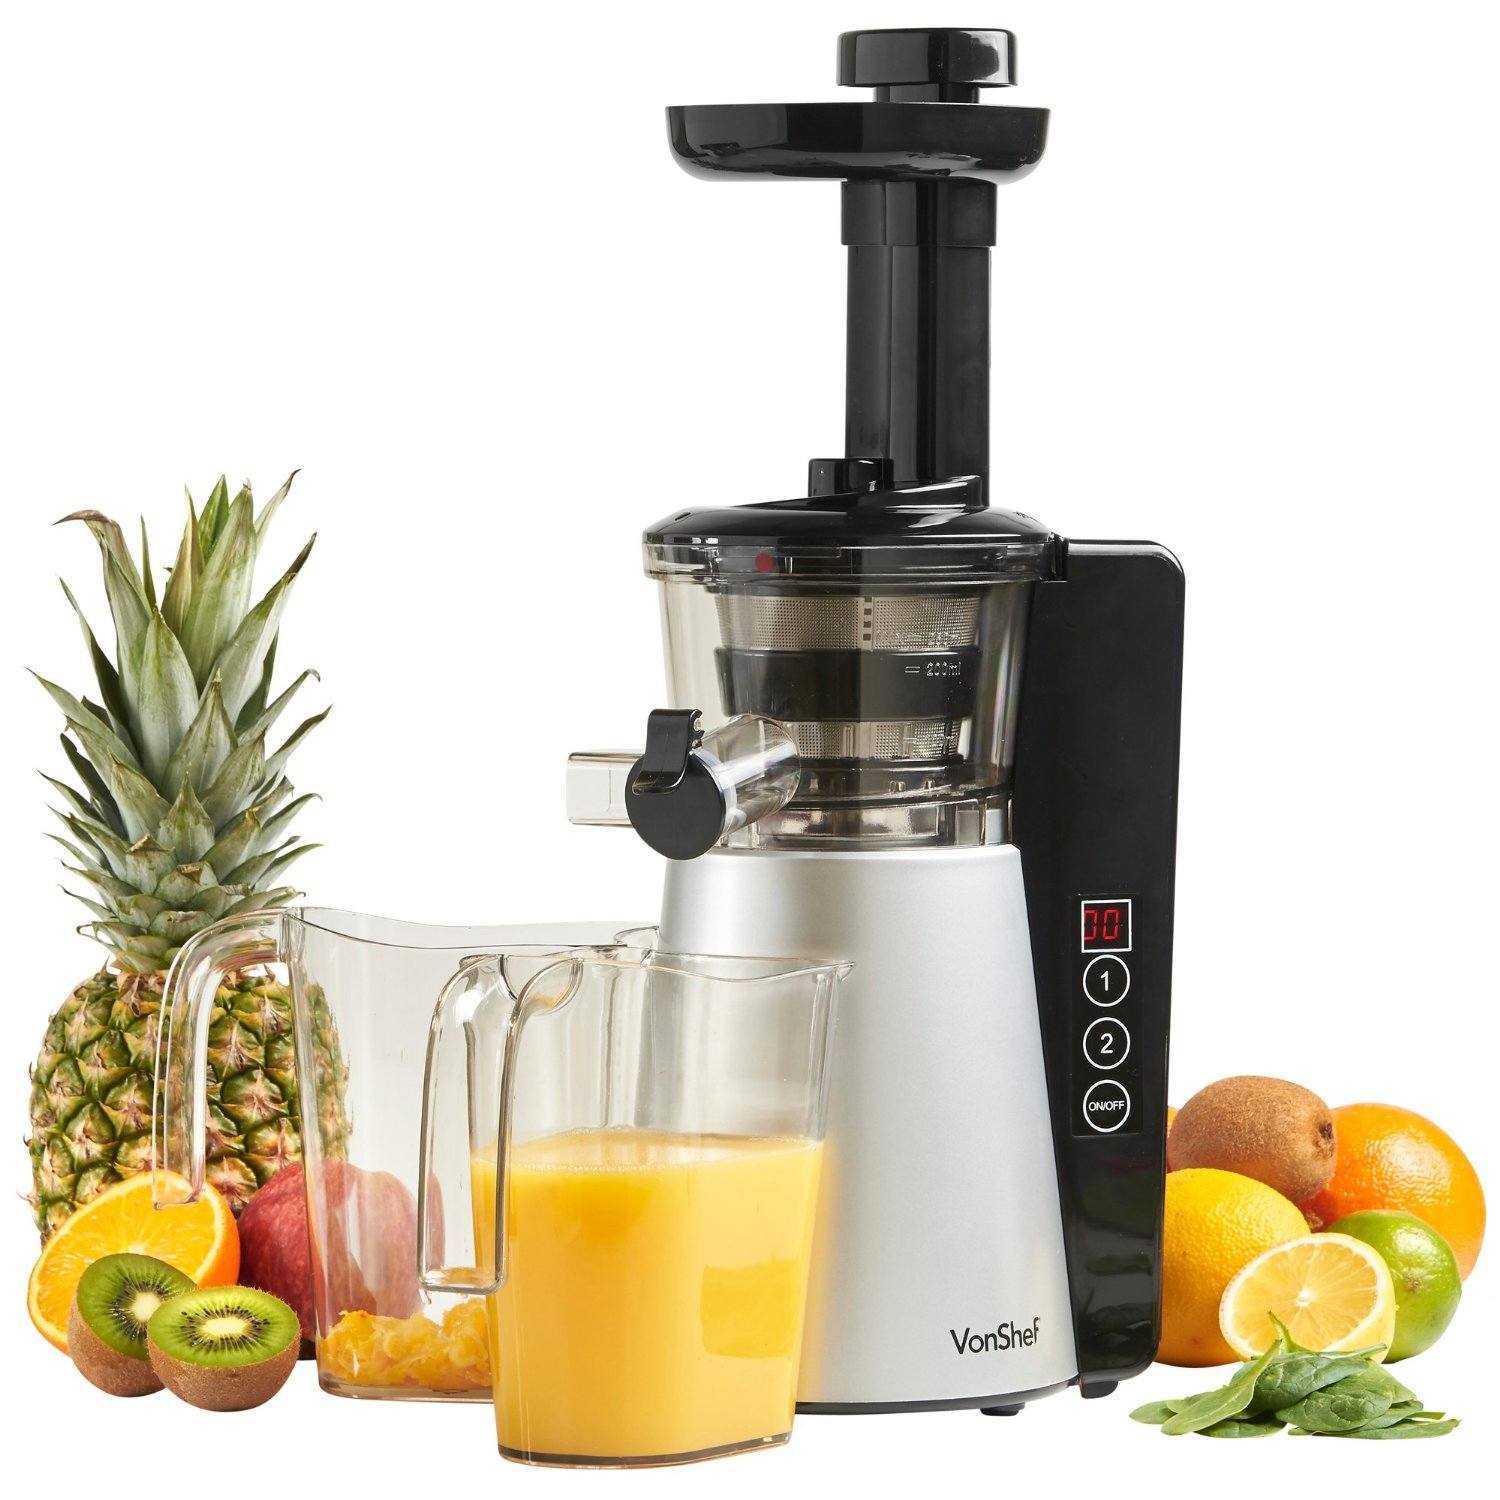 Best masticating juicer for leafy greens and fruits